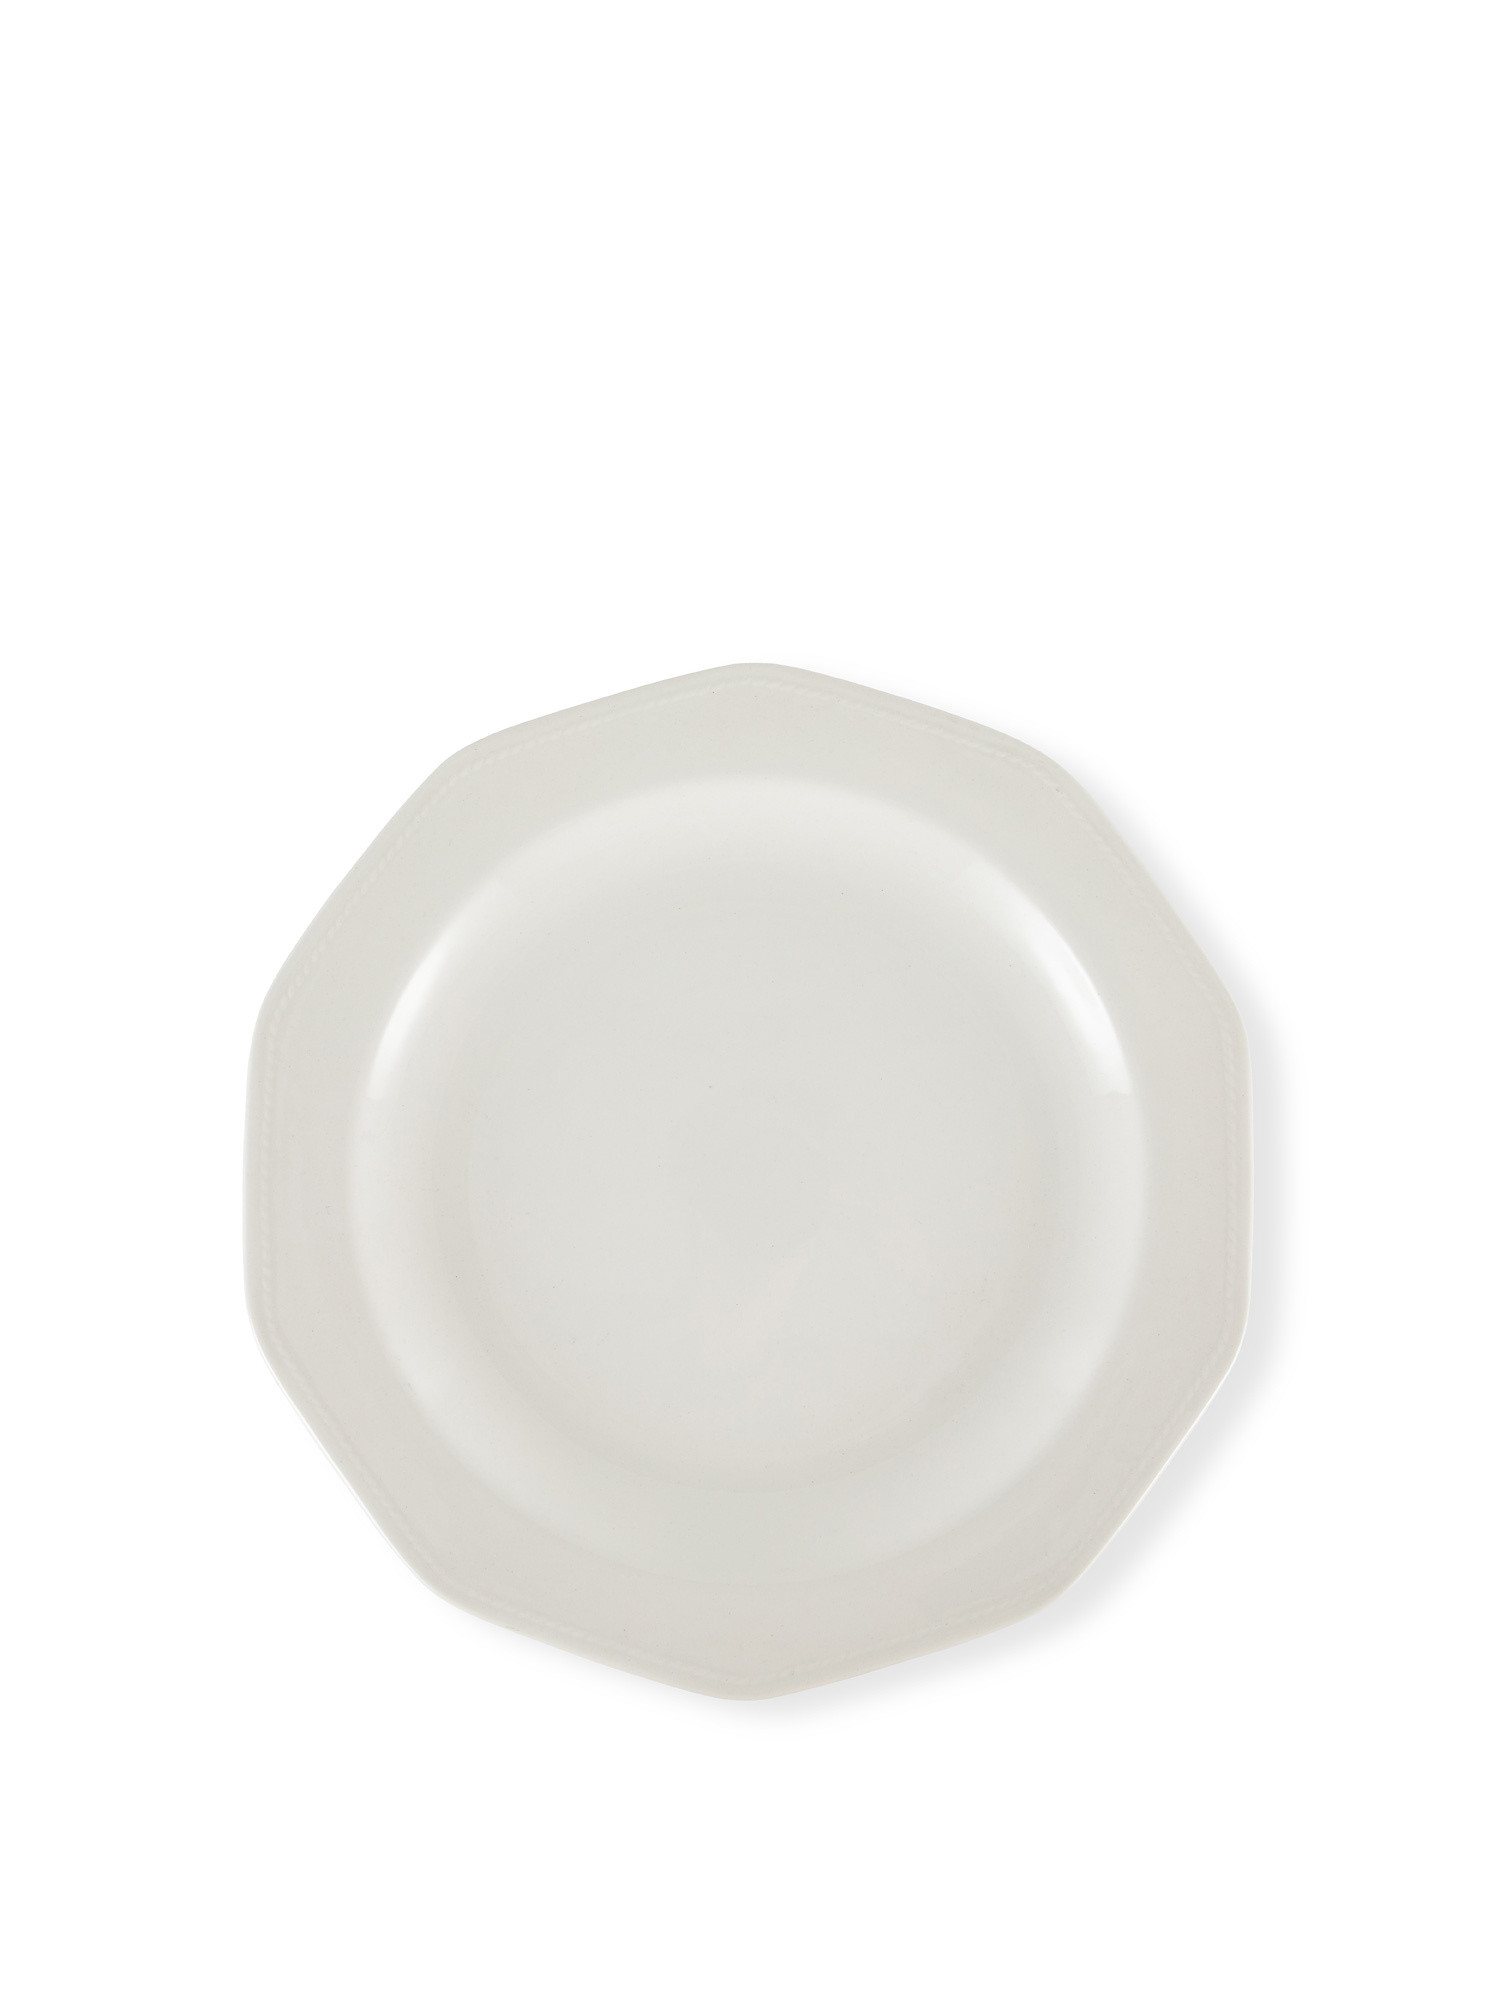 Artic White ceramic serving plate, White, large image number 0